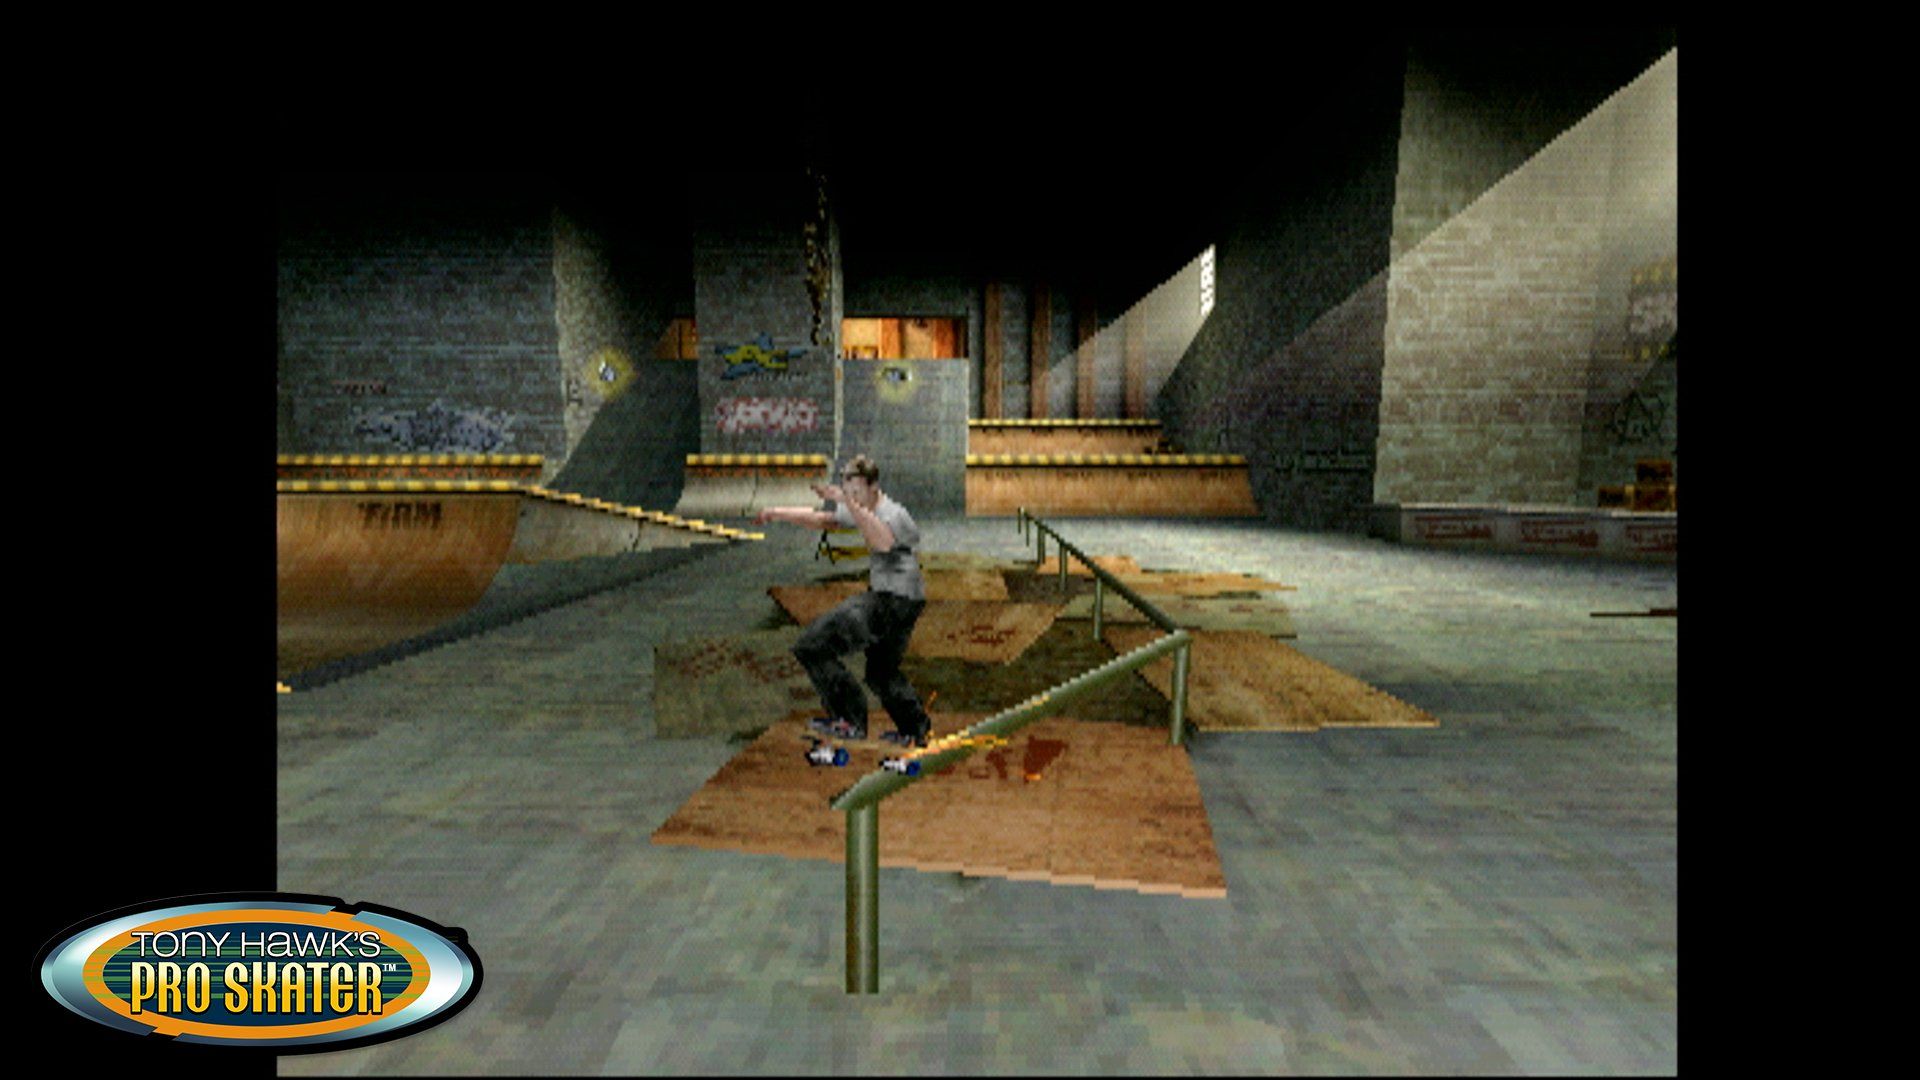 Tony Hawk's Pro Skater 1 and 2 is going to be